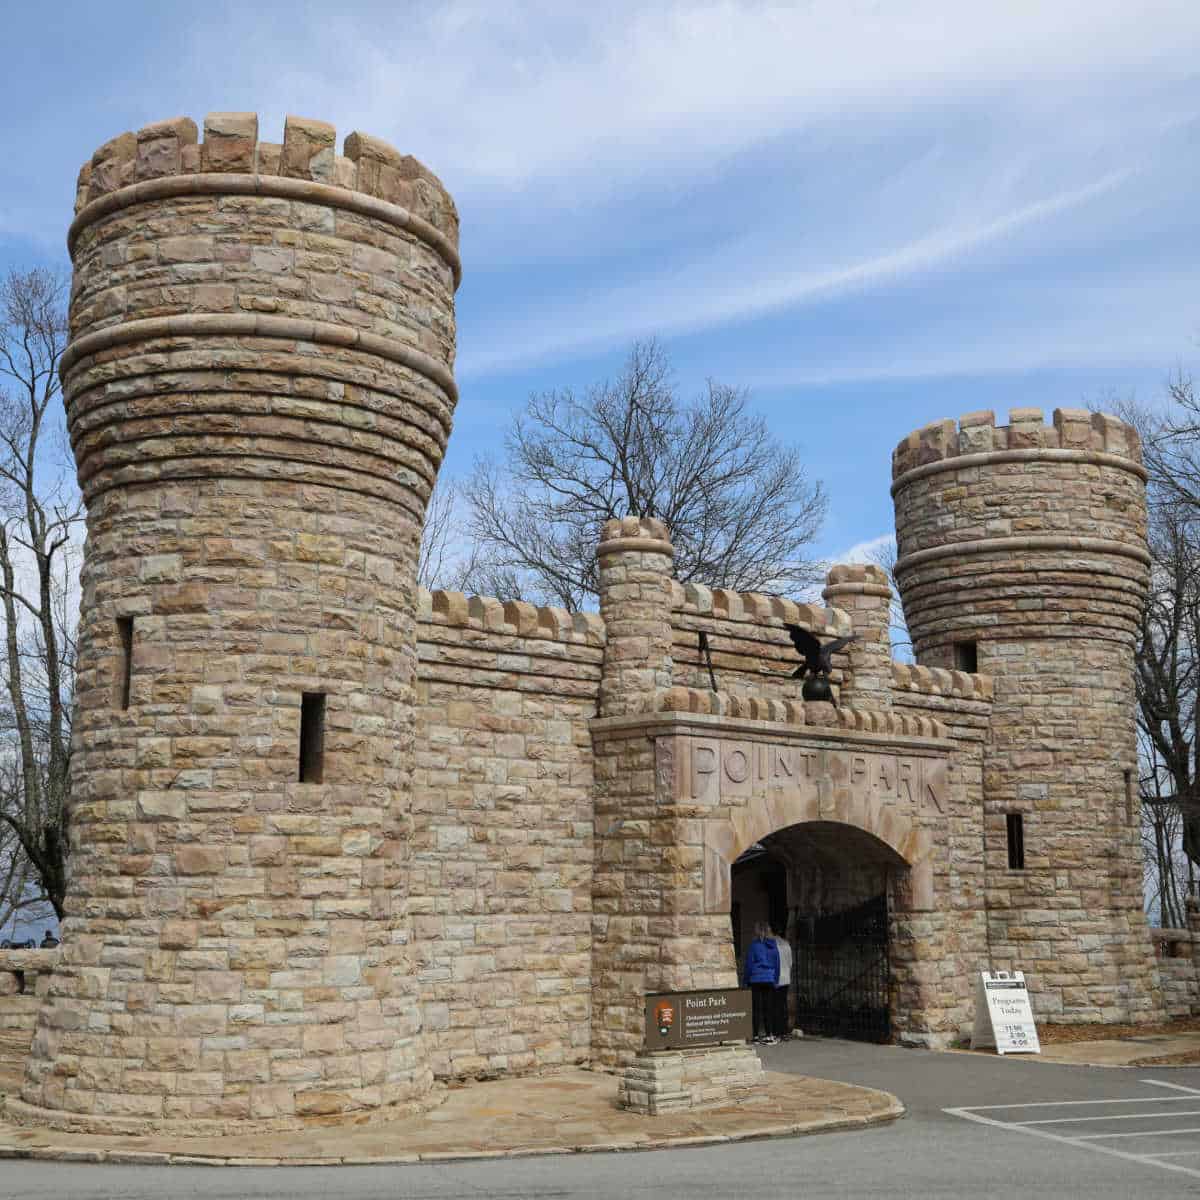 Point Park Gate at Chickamauuga and Chattanooga National Military Park in Georgia and Tennessee